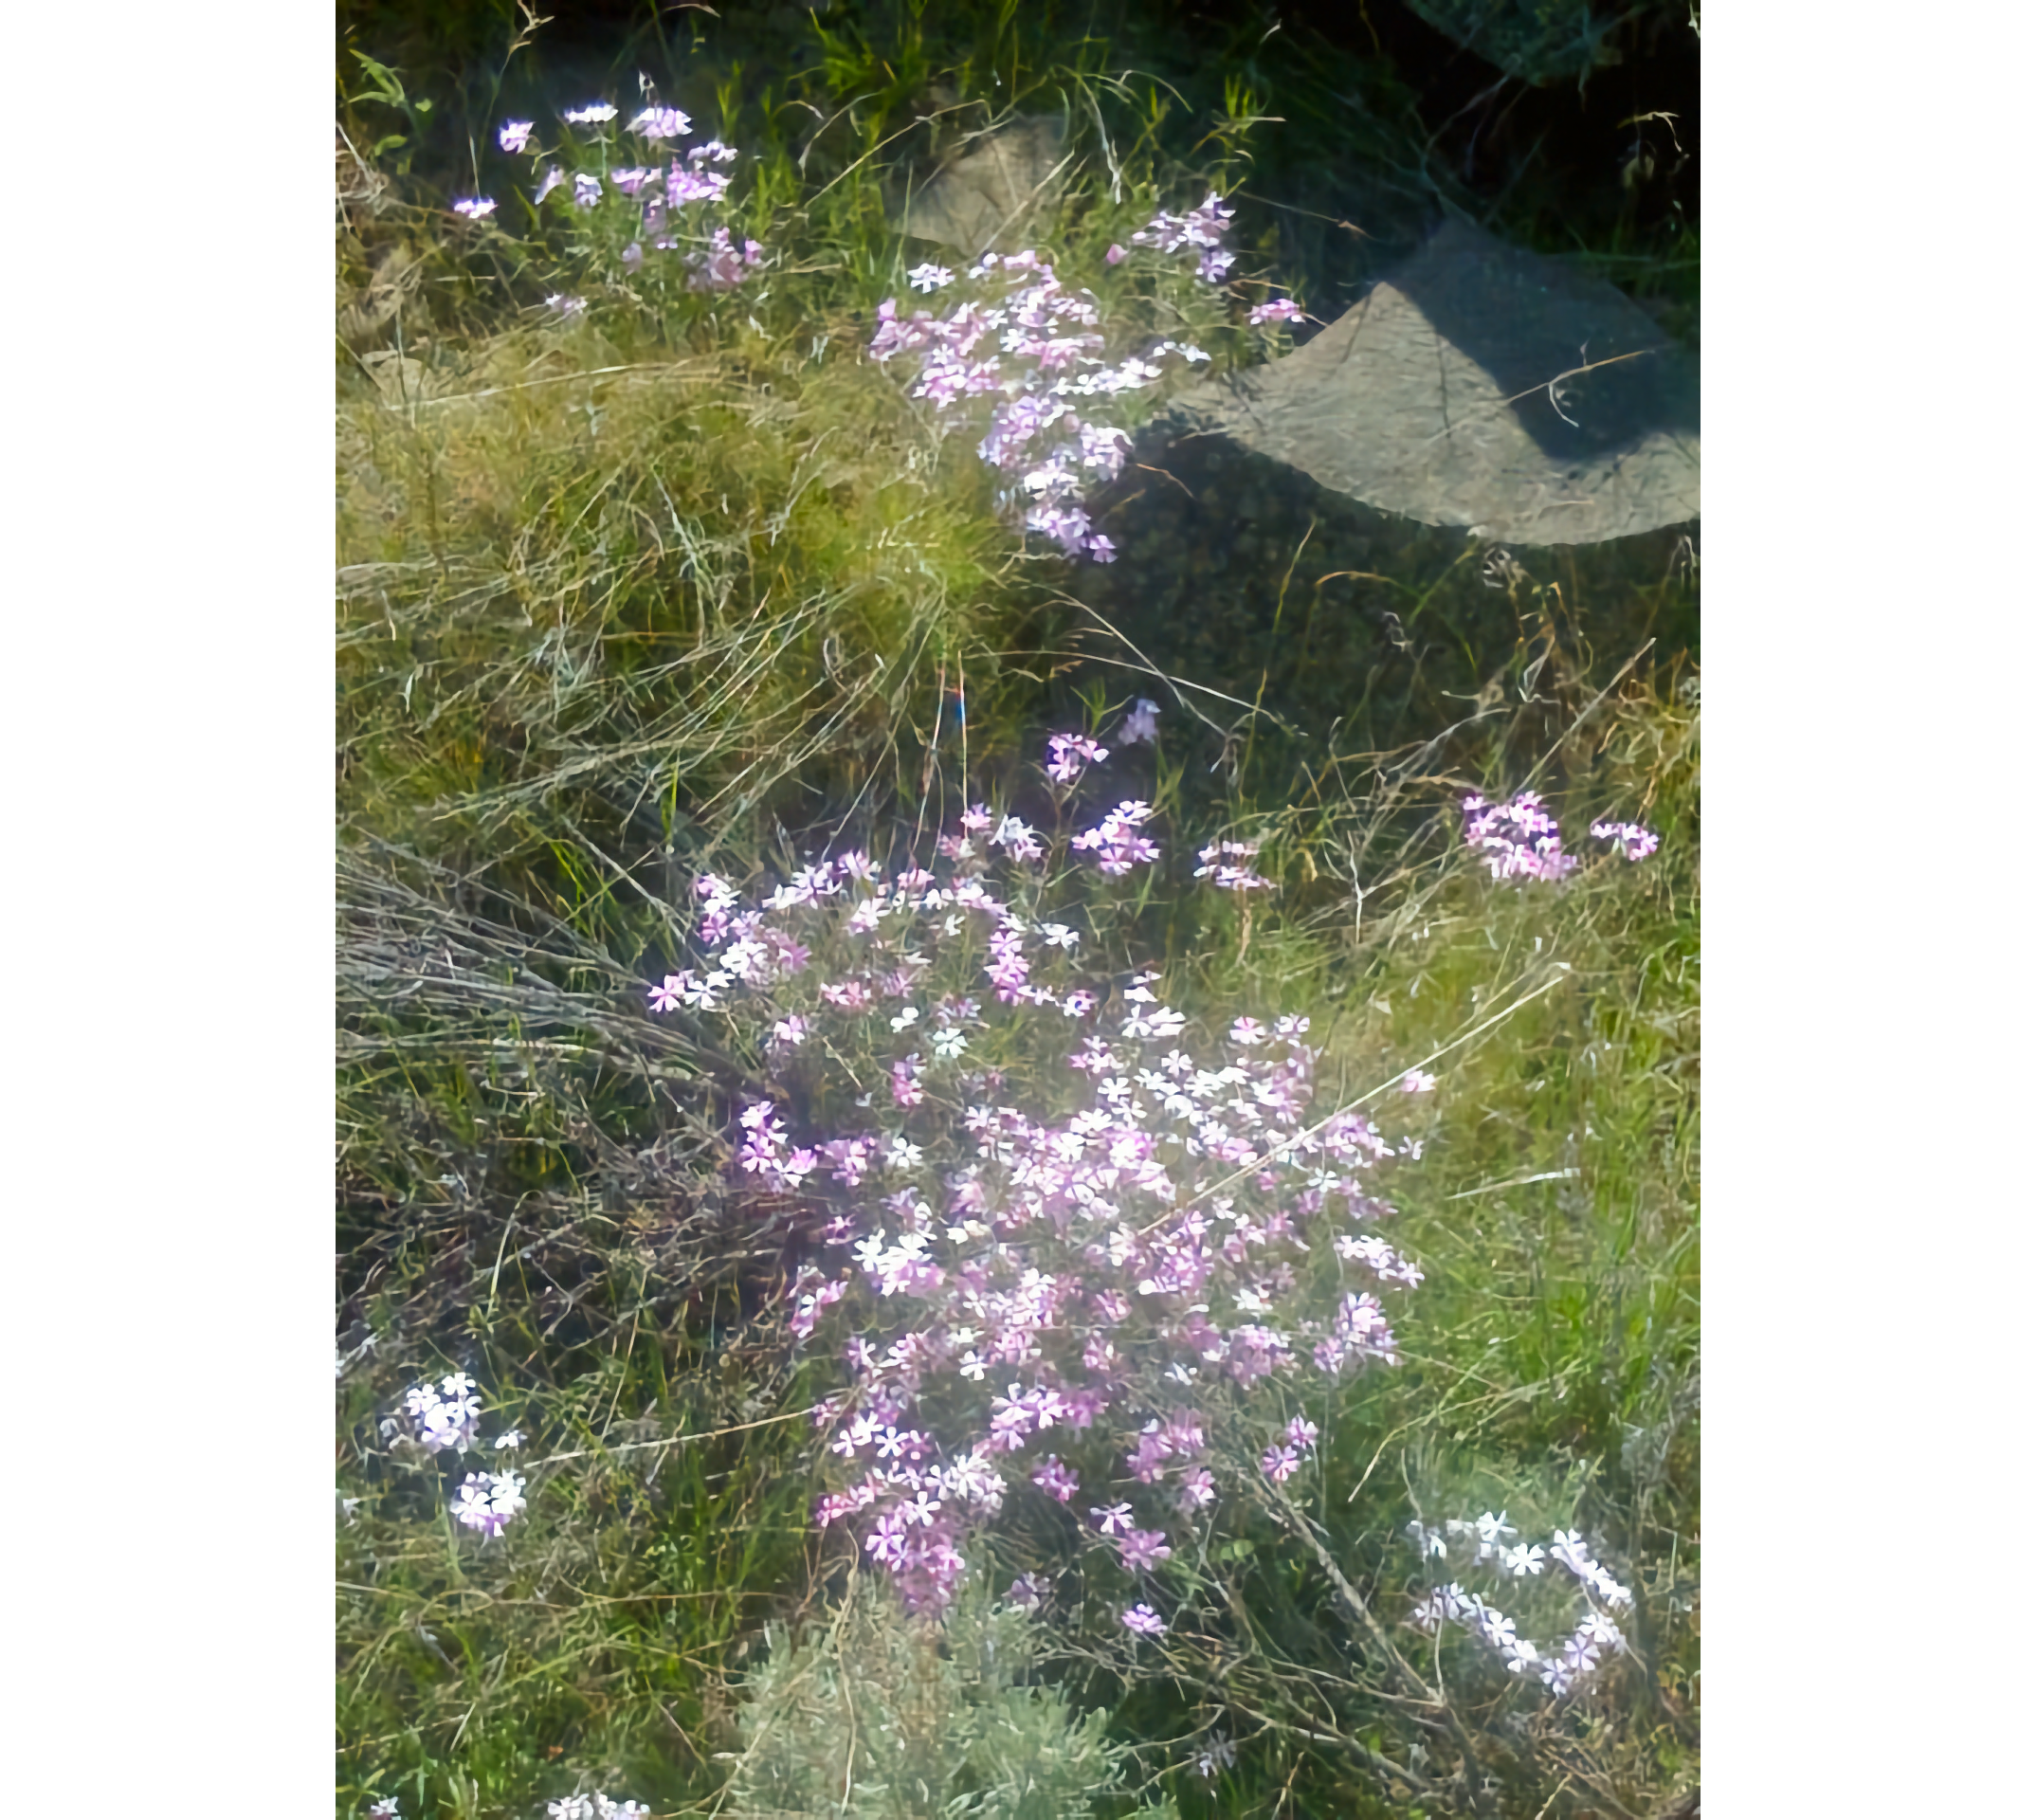 Photo of small purple flowers in foreground, with grey basalt rock in upper right, all against grass